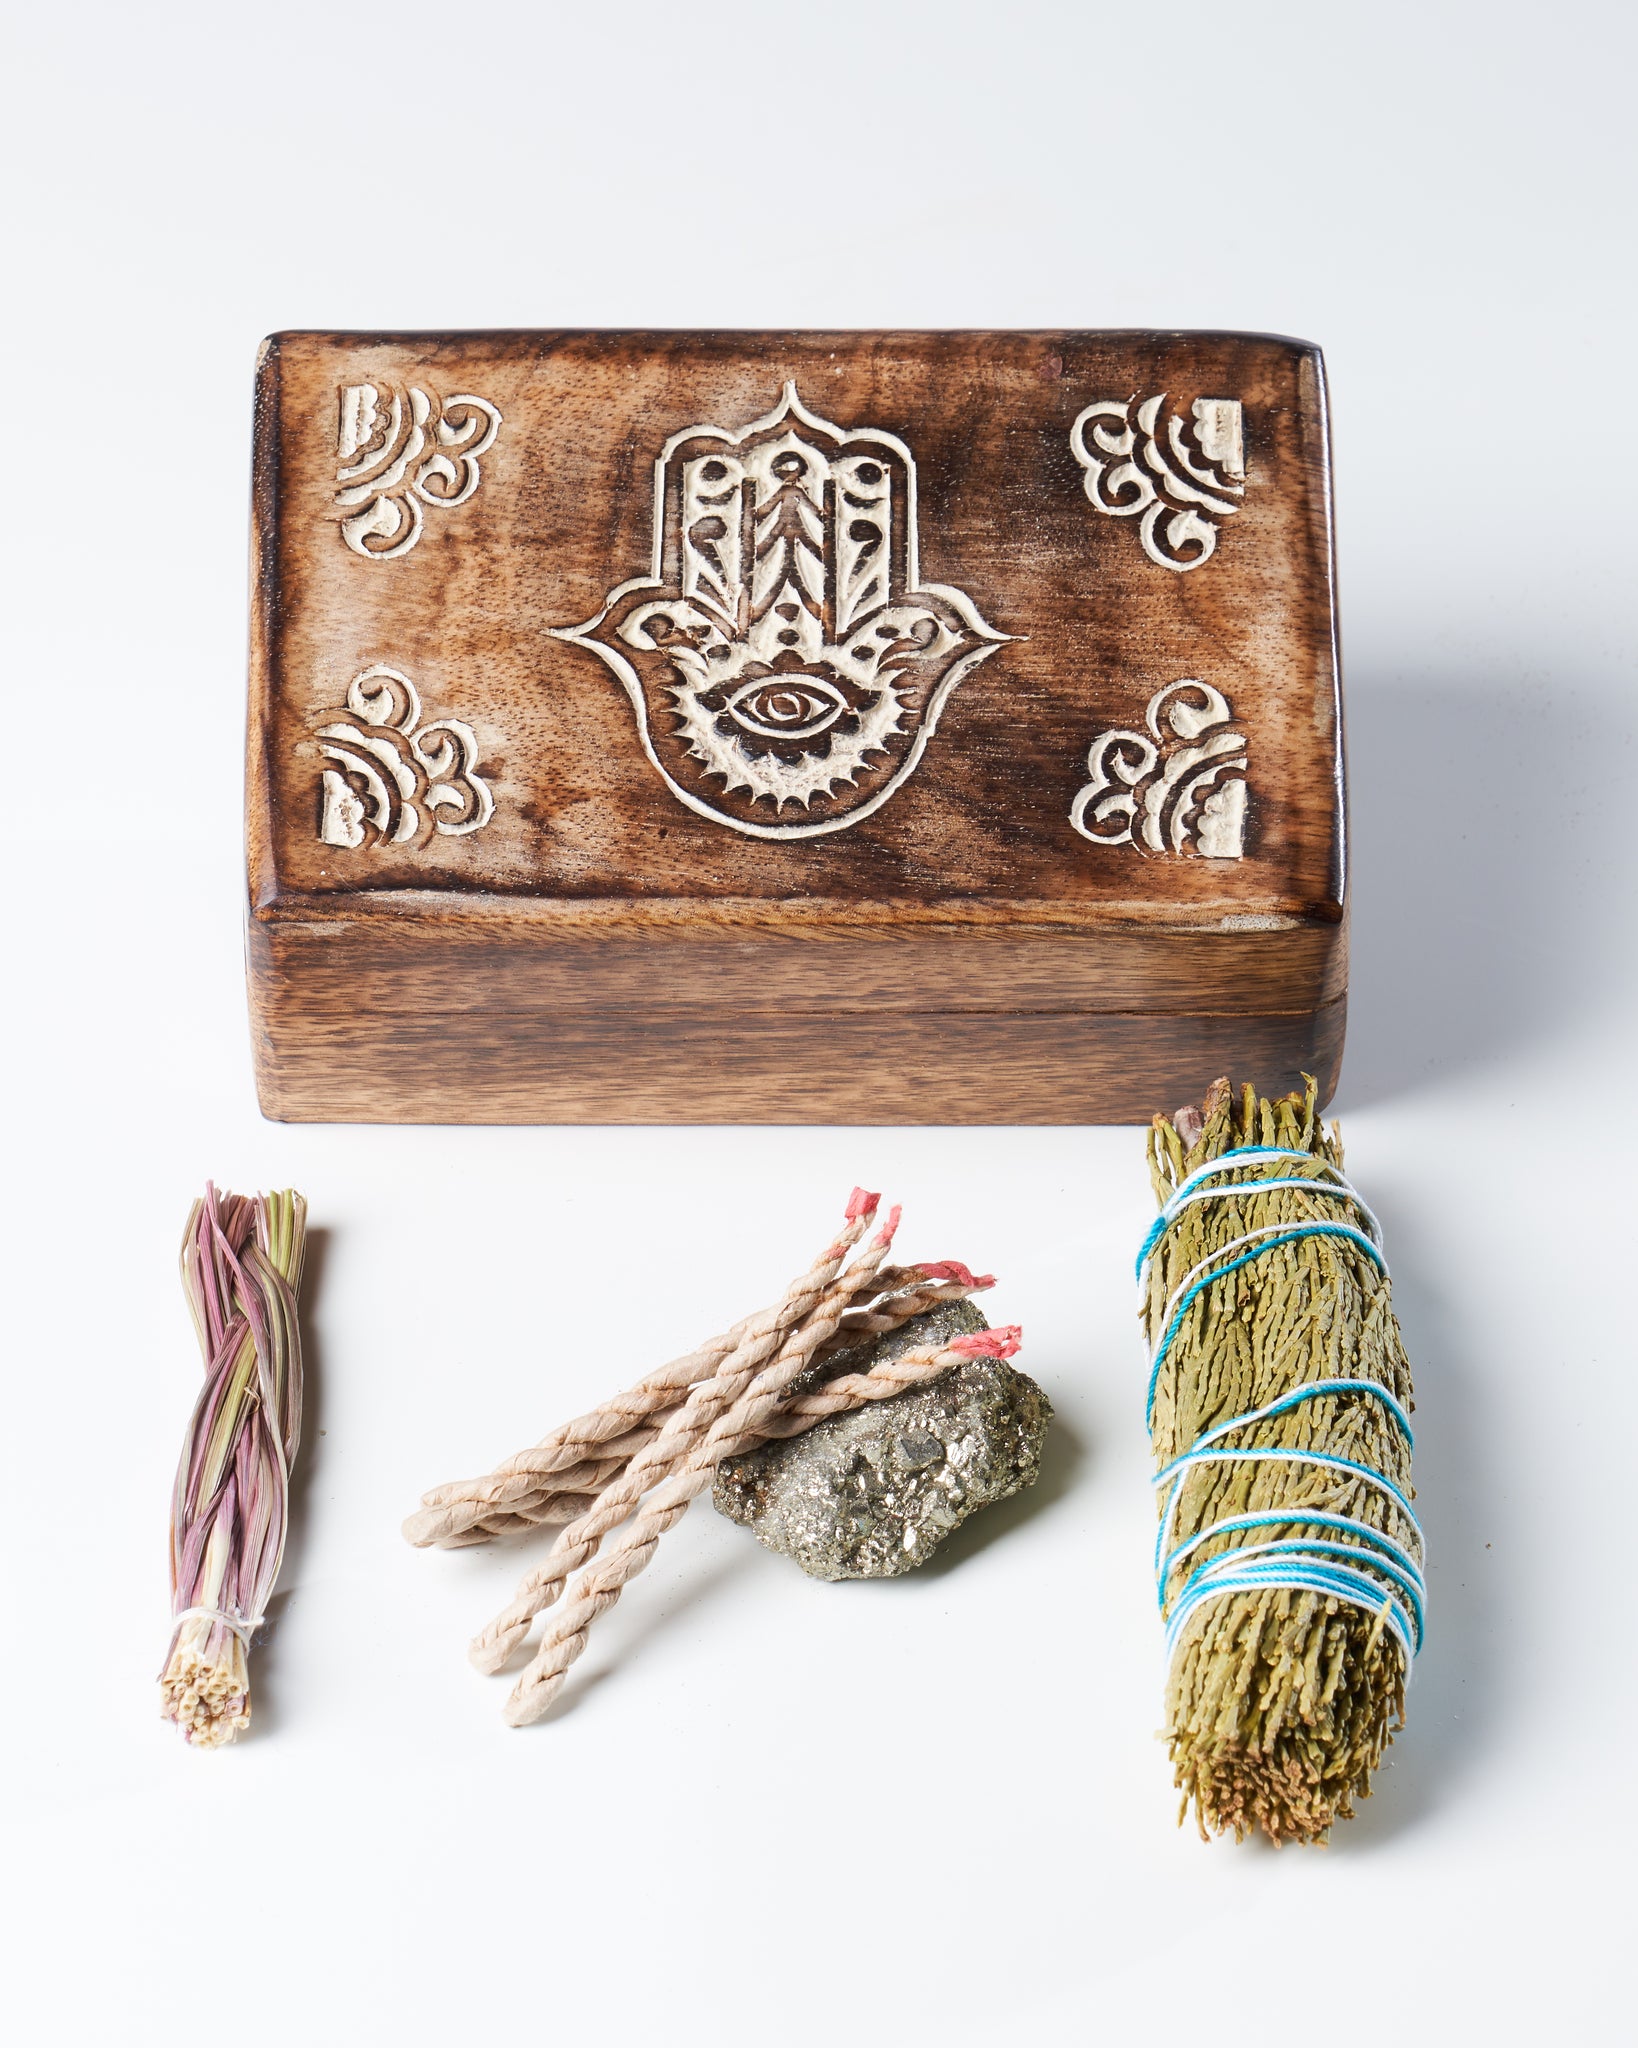 Guard Your Space with the Hamsa Guardian Kit - Cedar, Sweet Grass, Pyrite, and Zimbu Rope Incense to Clear, Protect, and Welcome Positive Vibrations. Comes in a Hand Carved Wooden Box!